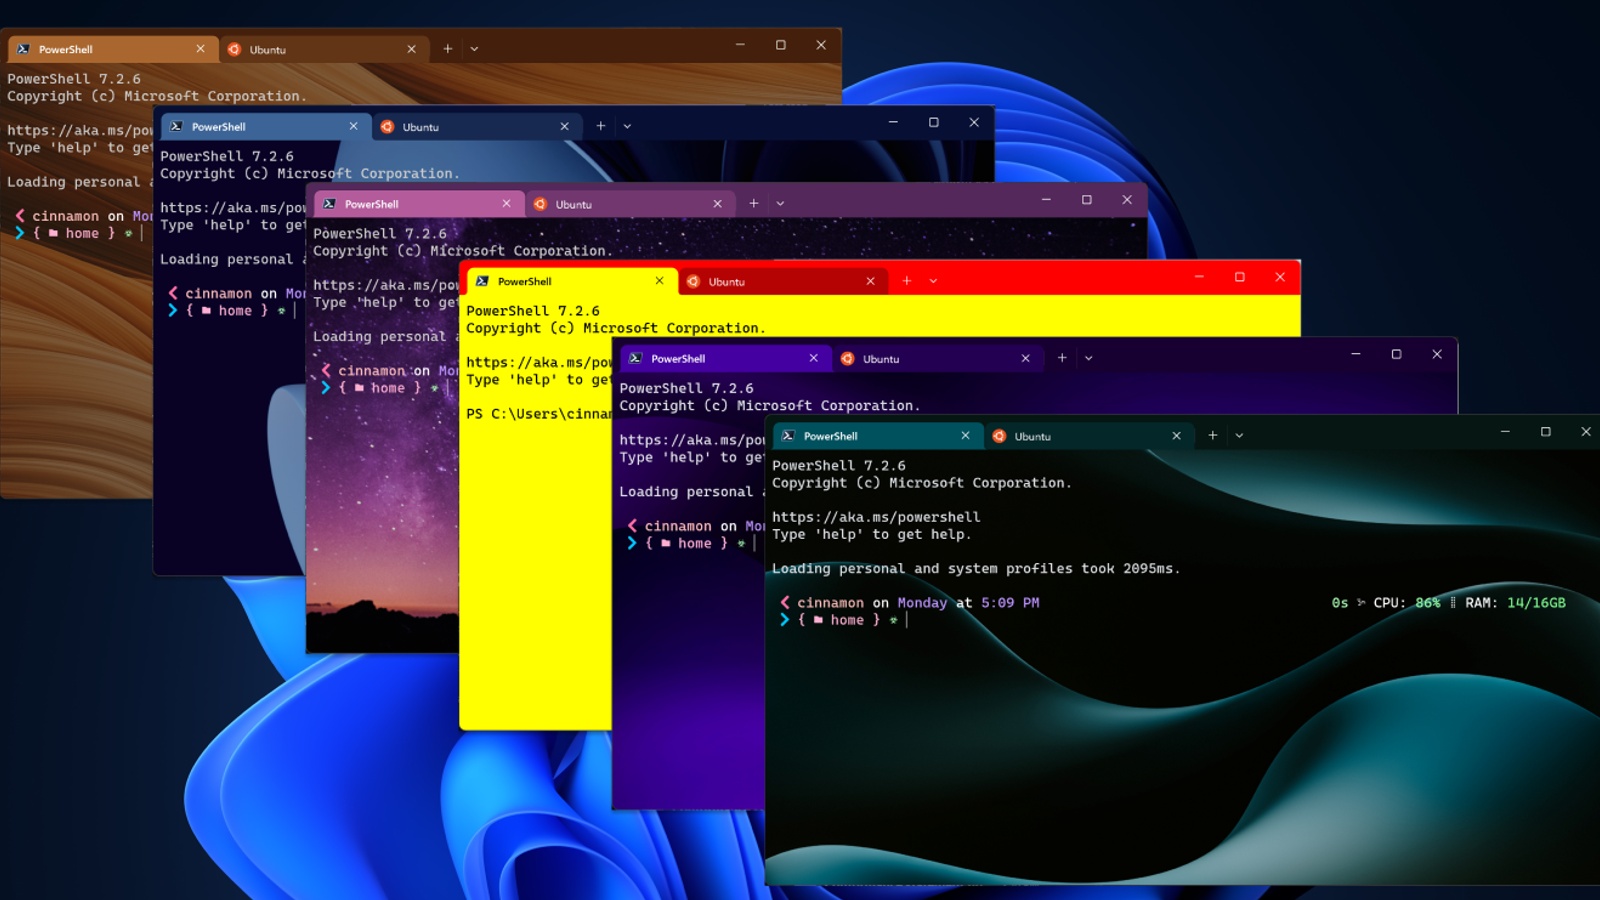 Windows Terminal gets support for creating custom themes